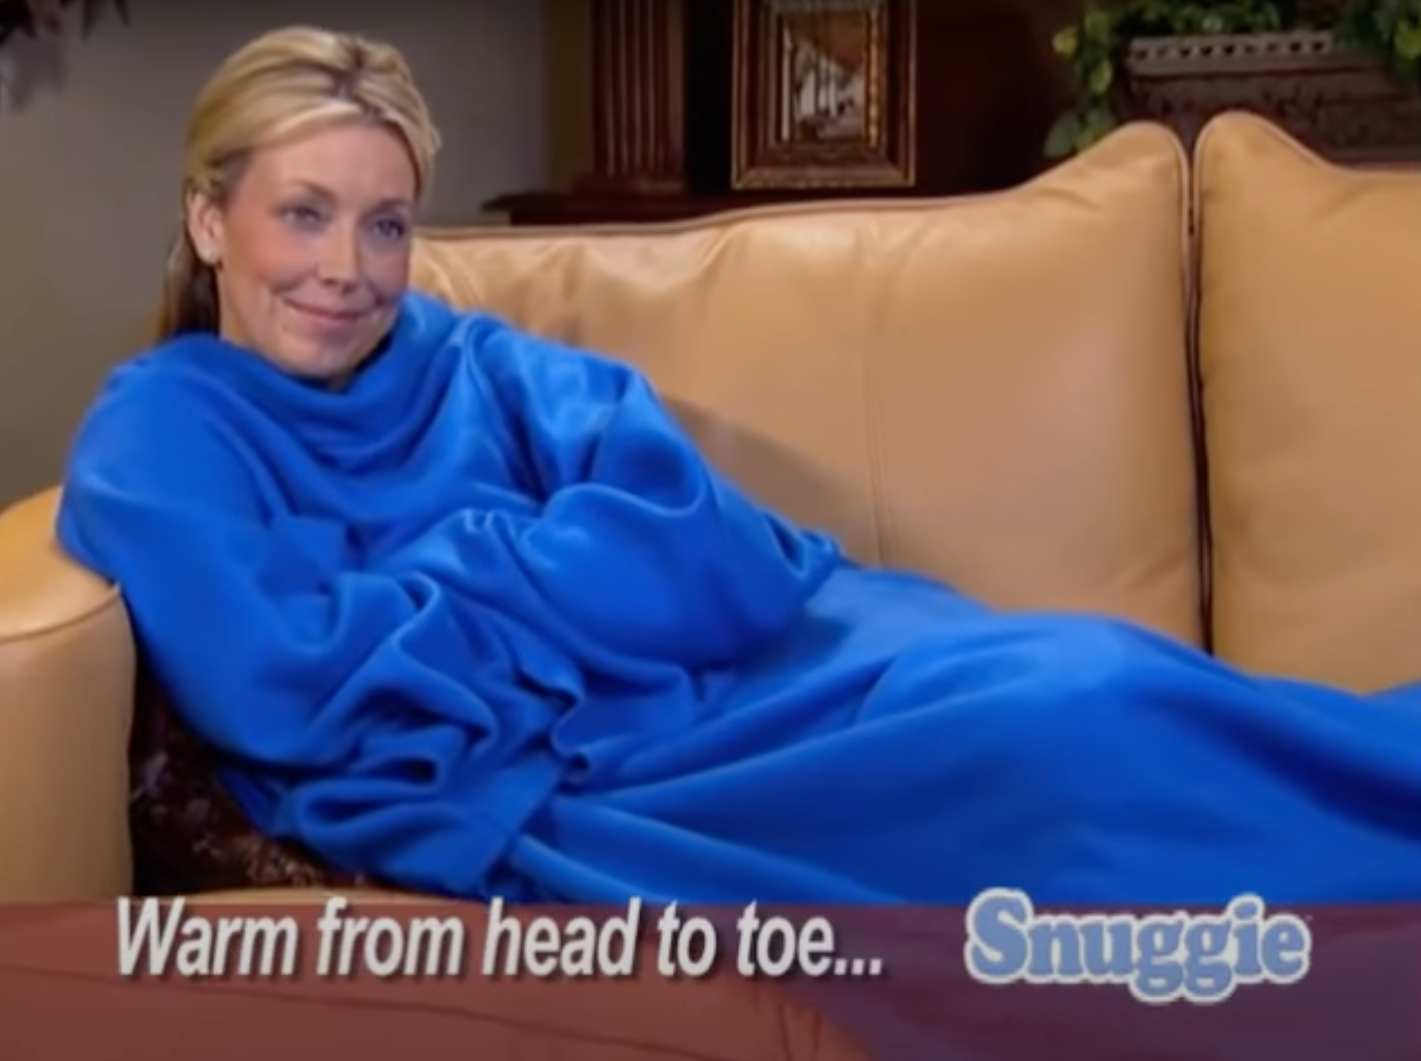 Woman in a Snuggie blanket on a couch, text advertises being &#x27;Warm from head to toe&#x27;